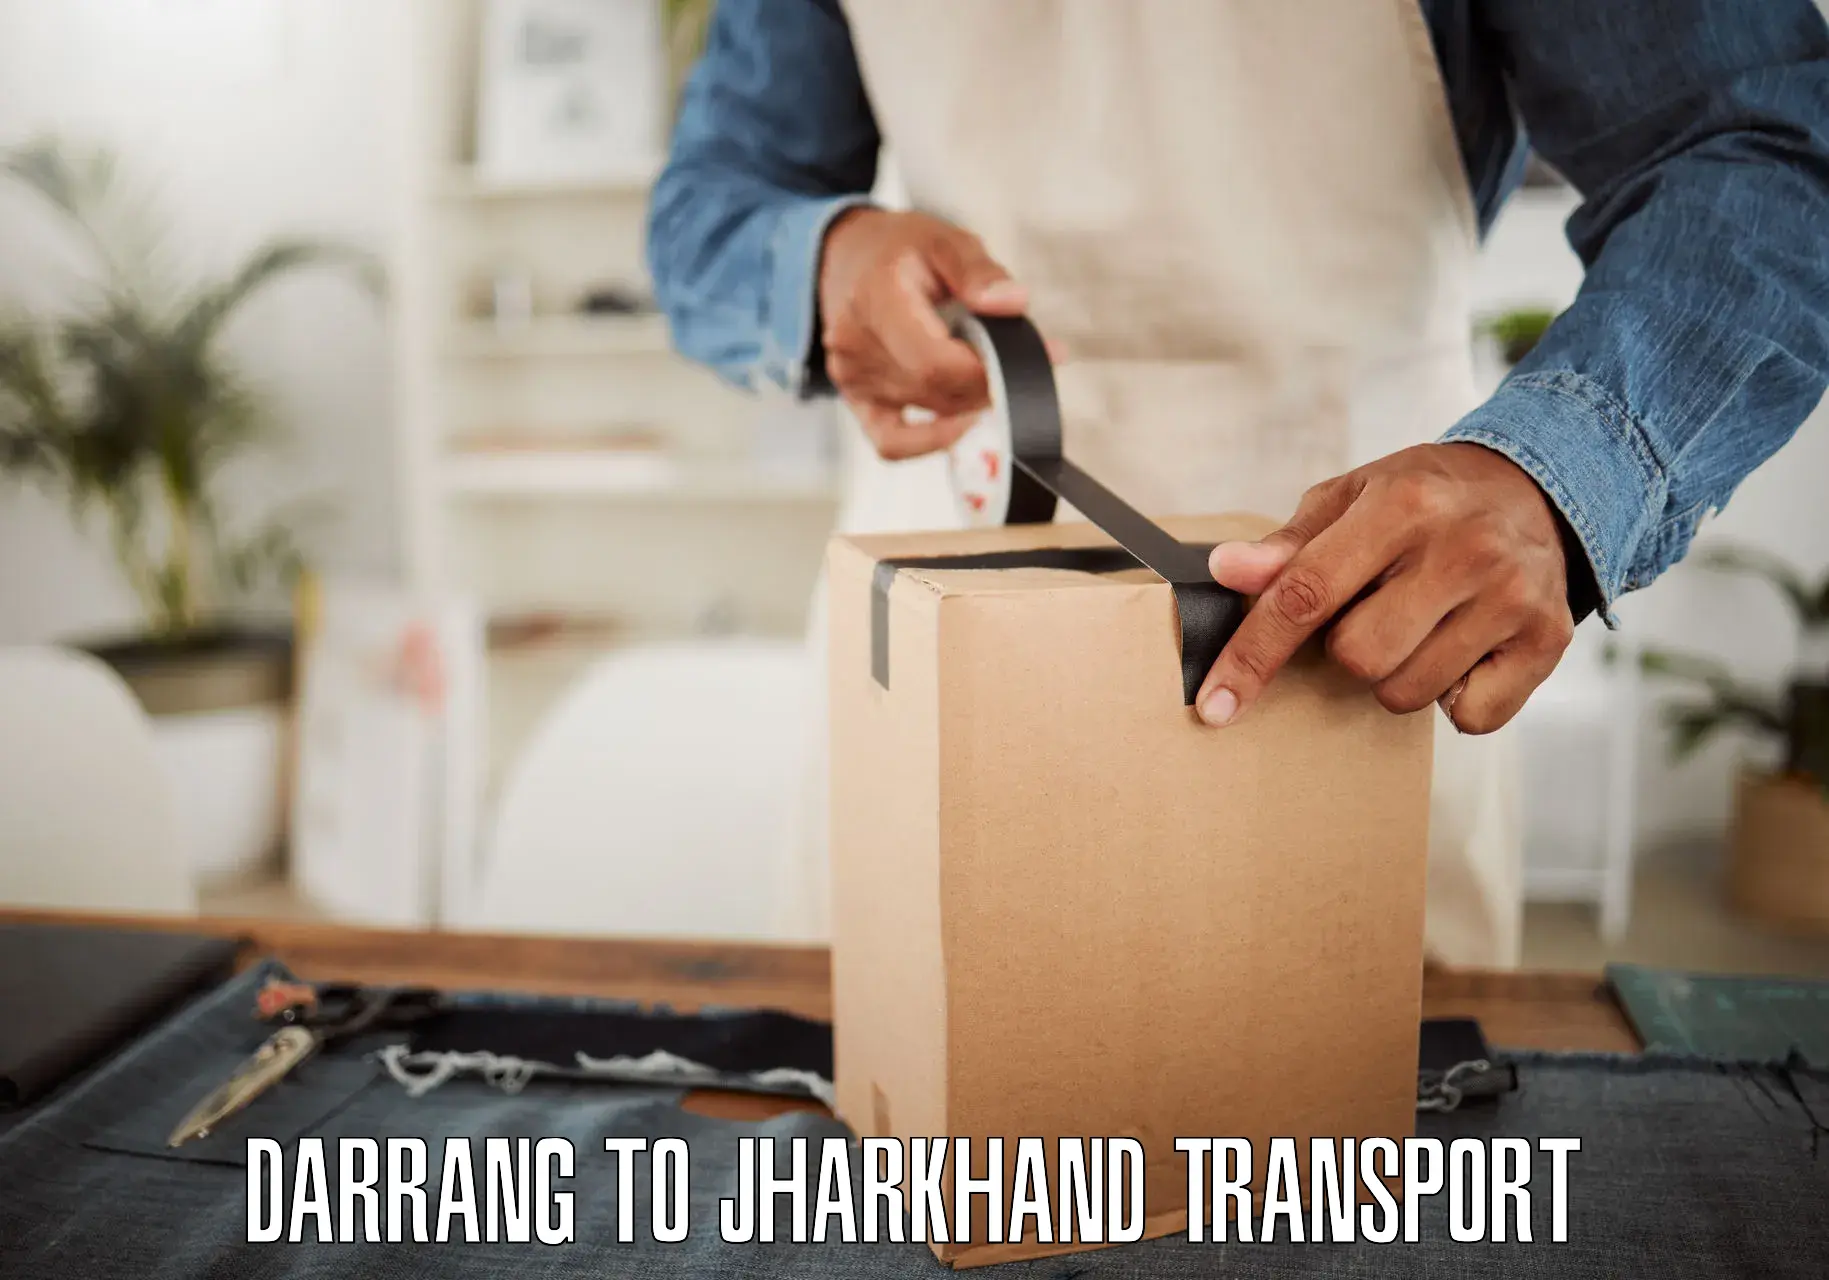 Nationwide transport services Darrang to Dhanbad